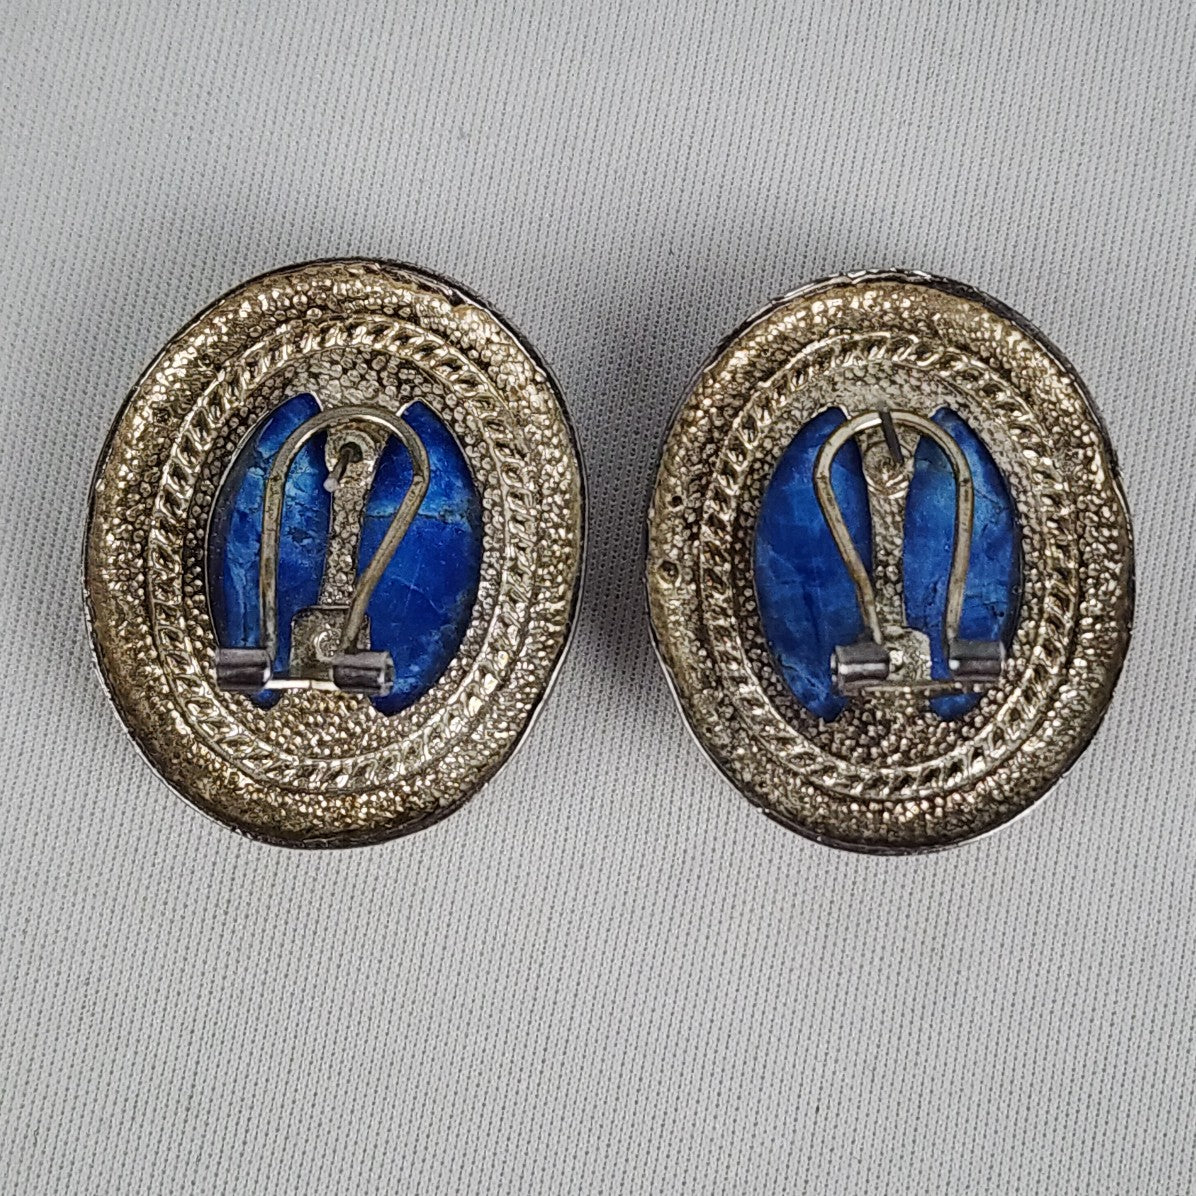 Vintage Silver & Blue Natural Stone Oval Earrings